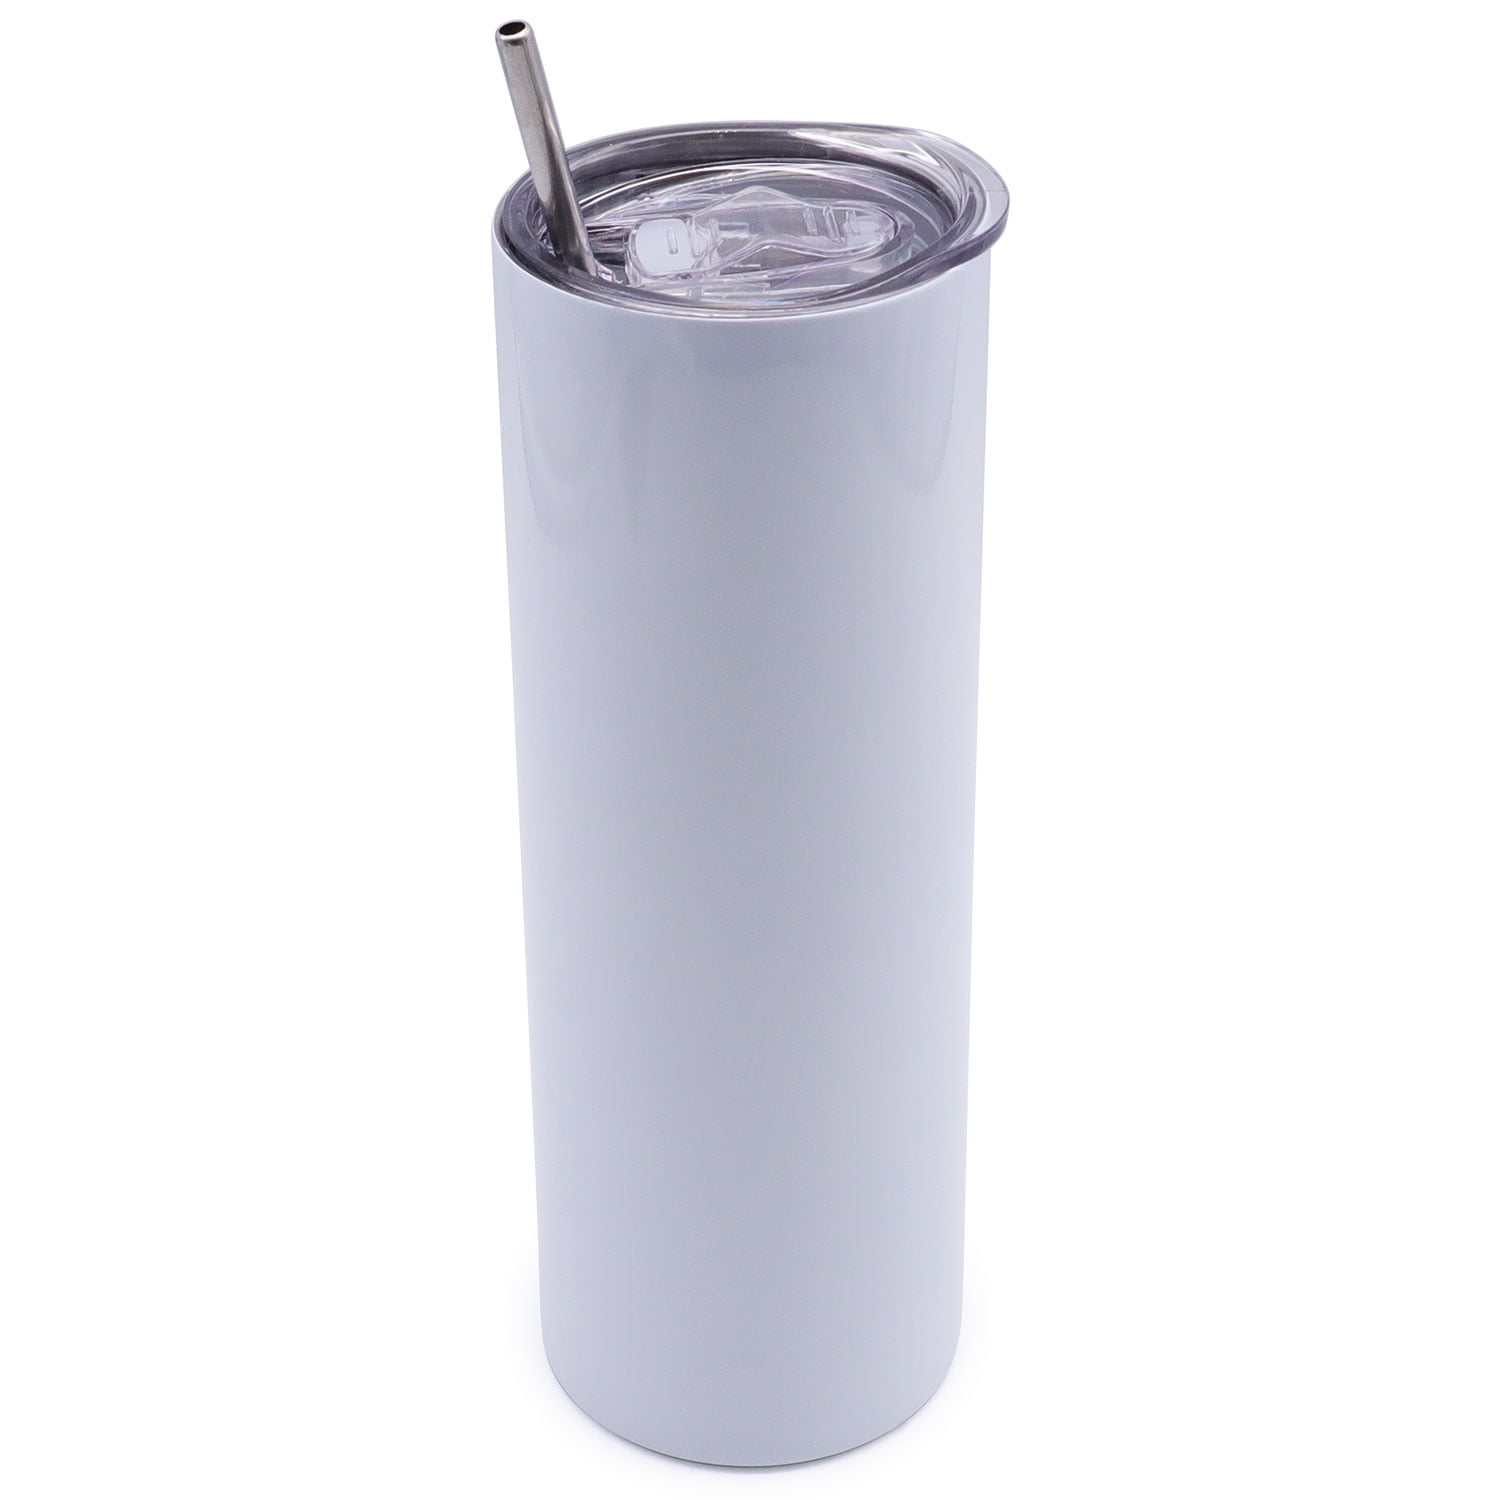 US warehouse 15-30oz Sublimation Straight Tumbler with Straw Blanks  Stainless Steel Glossy Cup Water Bottle Double-Wall Vacuum Insulated Mug  Fast